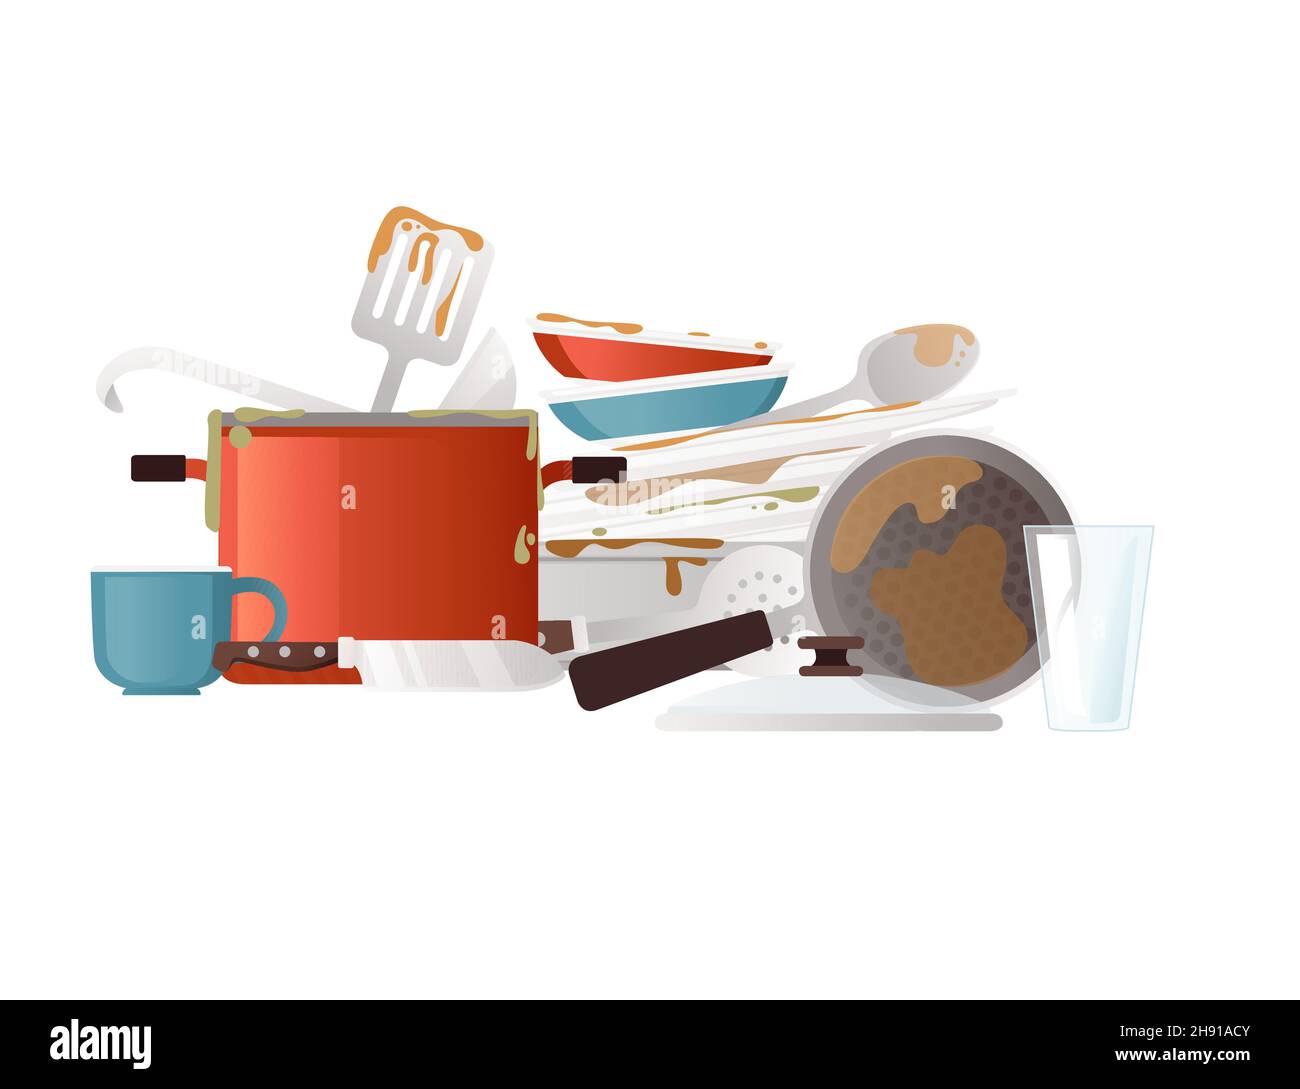 Unclean dirty stack of kitchen dishware and utensils vector illustration on white background Stock Vector